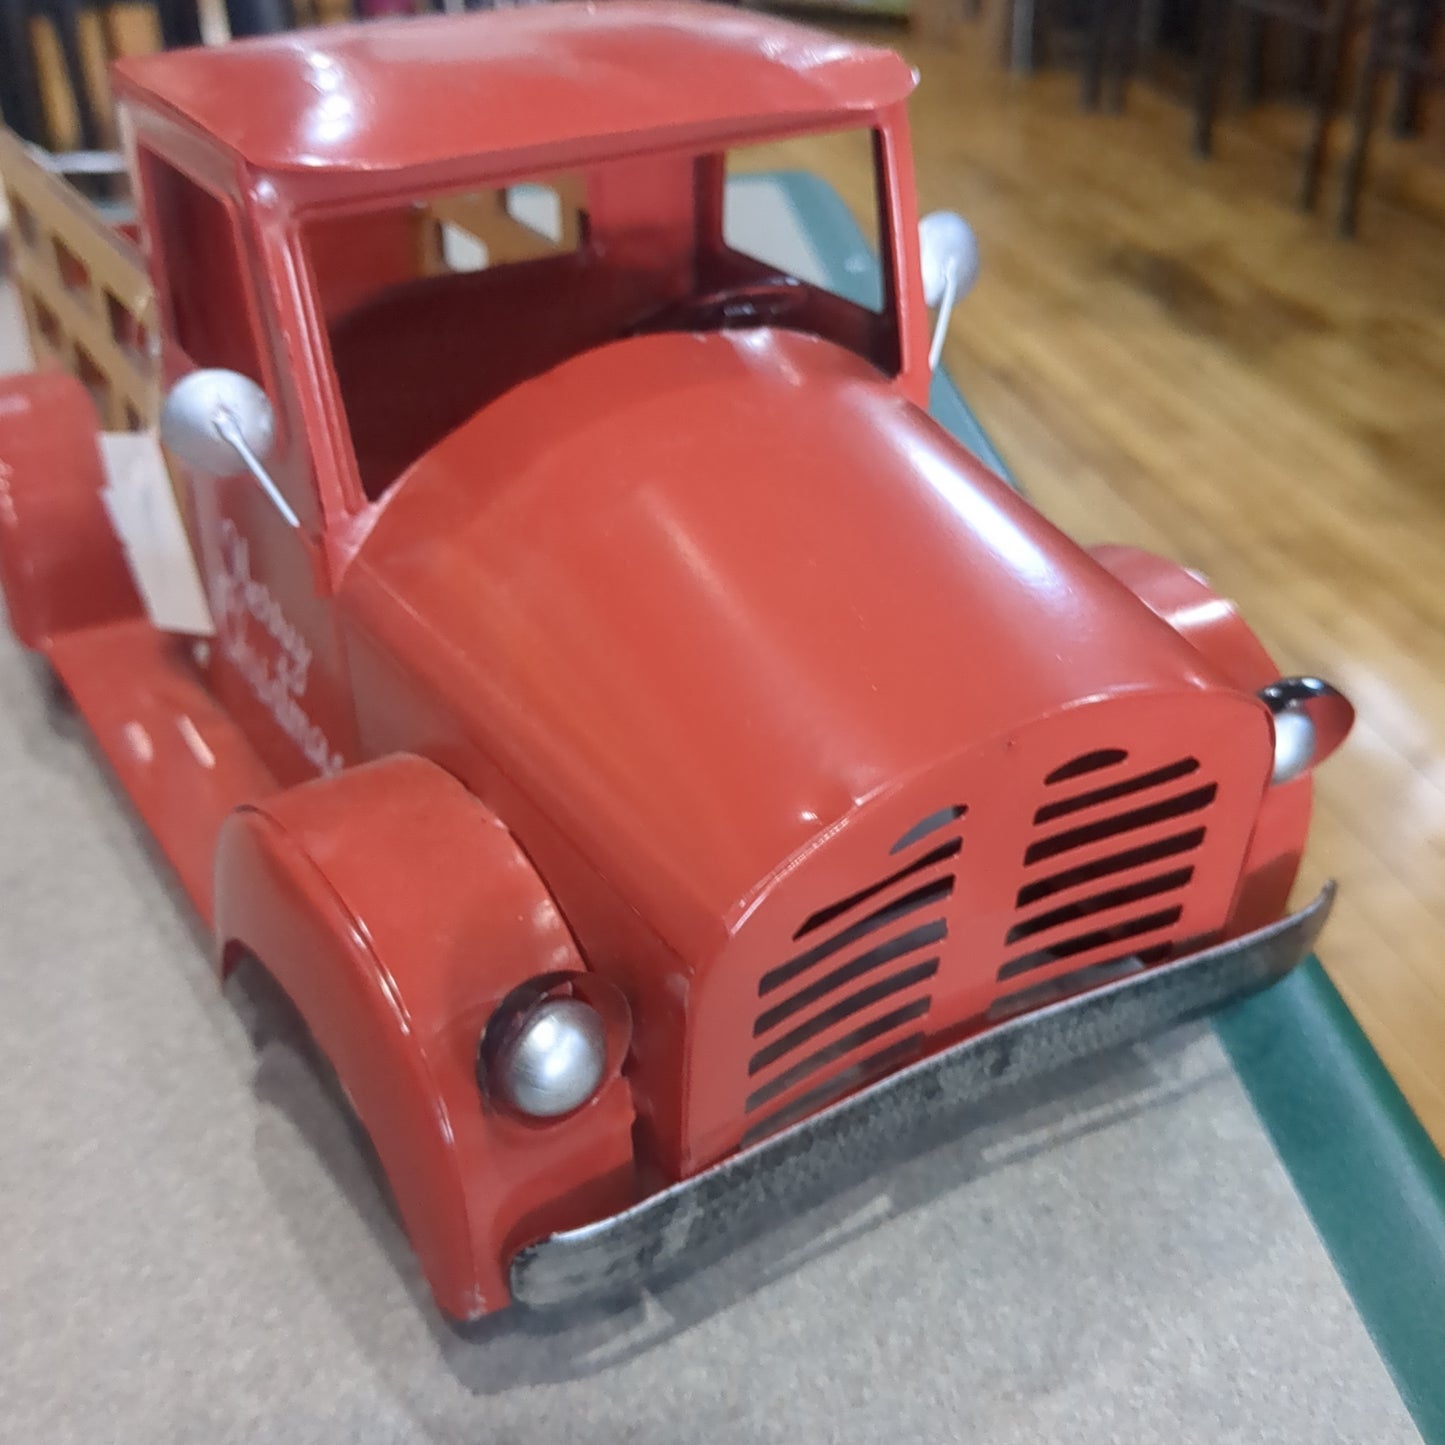 Red metal truck for decor says Merry Christmas